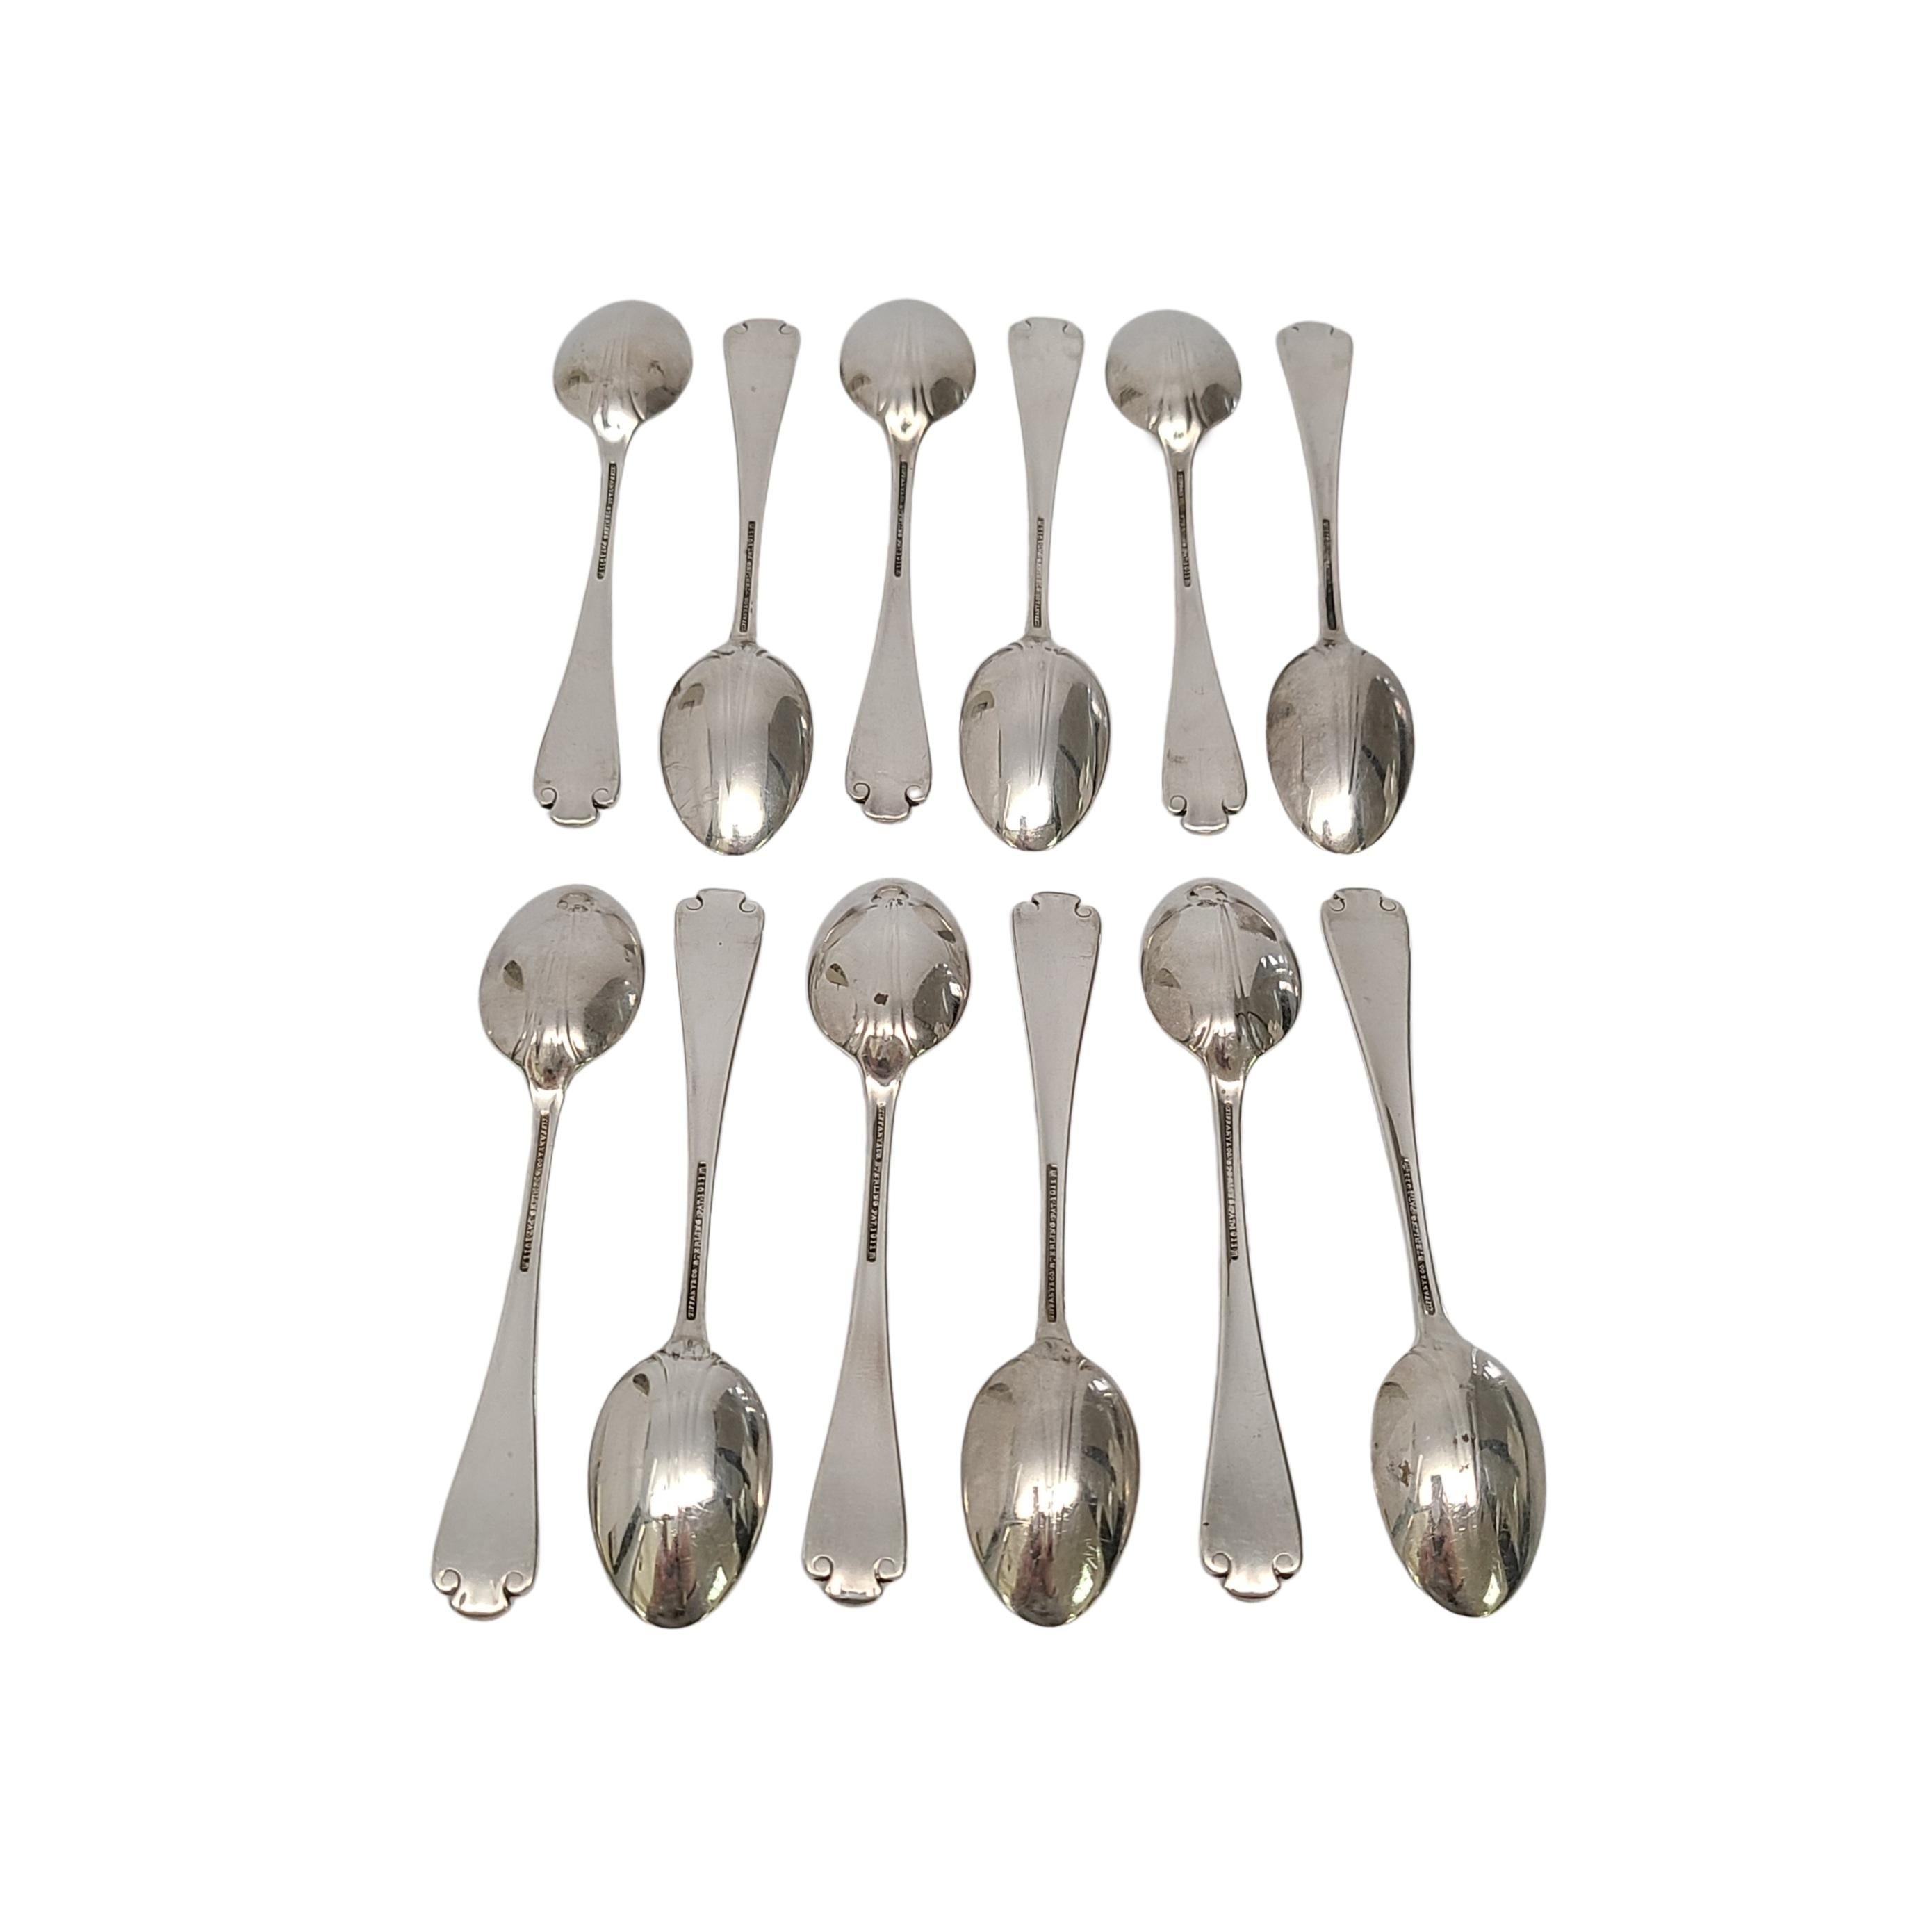 Set of 12 sterling silver demitasse spoons by Tiffany & Co in the Flemish pattern.

Monogram appears to be EWM

Beautiful small spoons in the Flemish pattern, featuring a simple and elegant scroll design, making it a timeless classic that is still